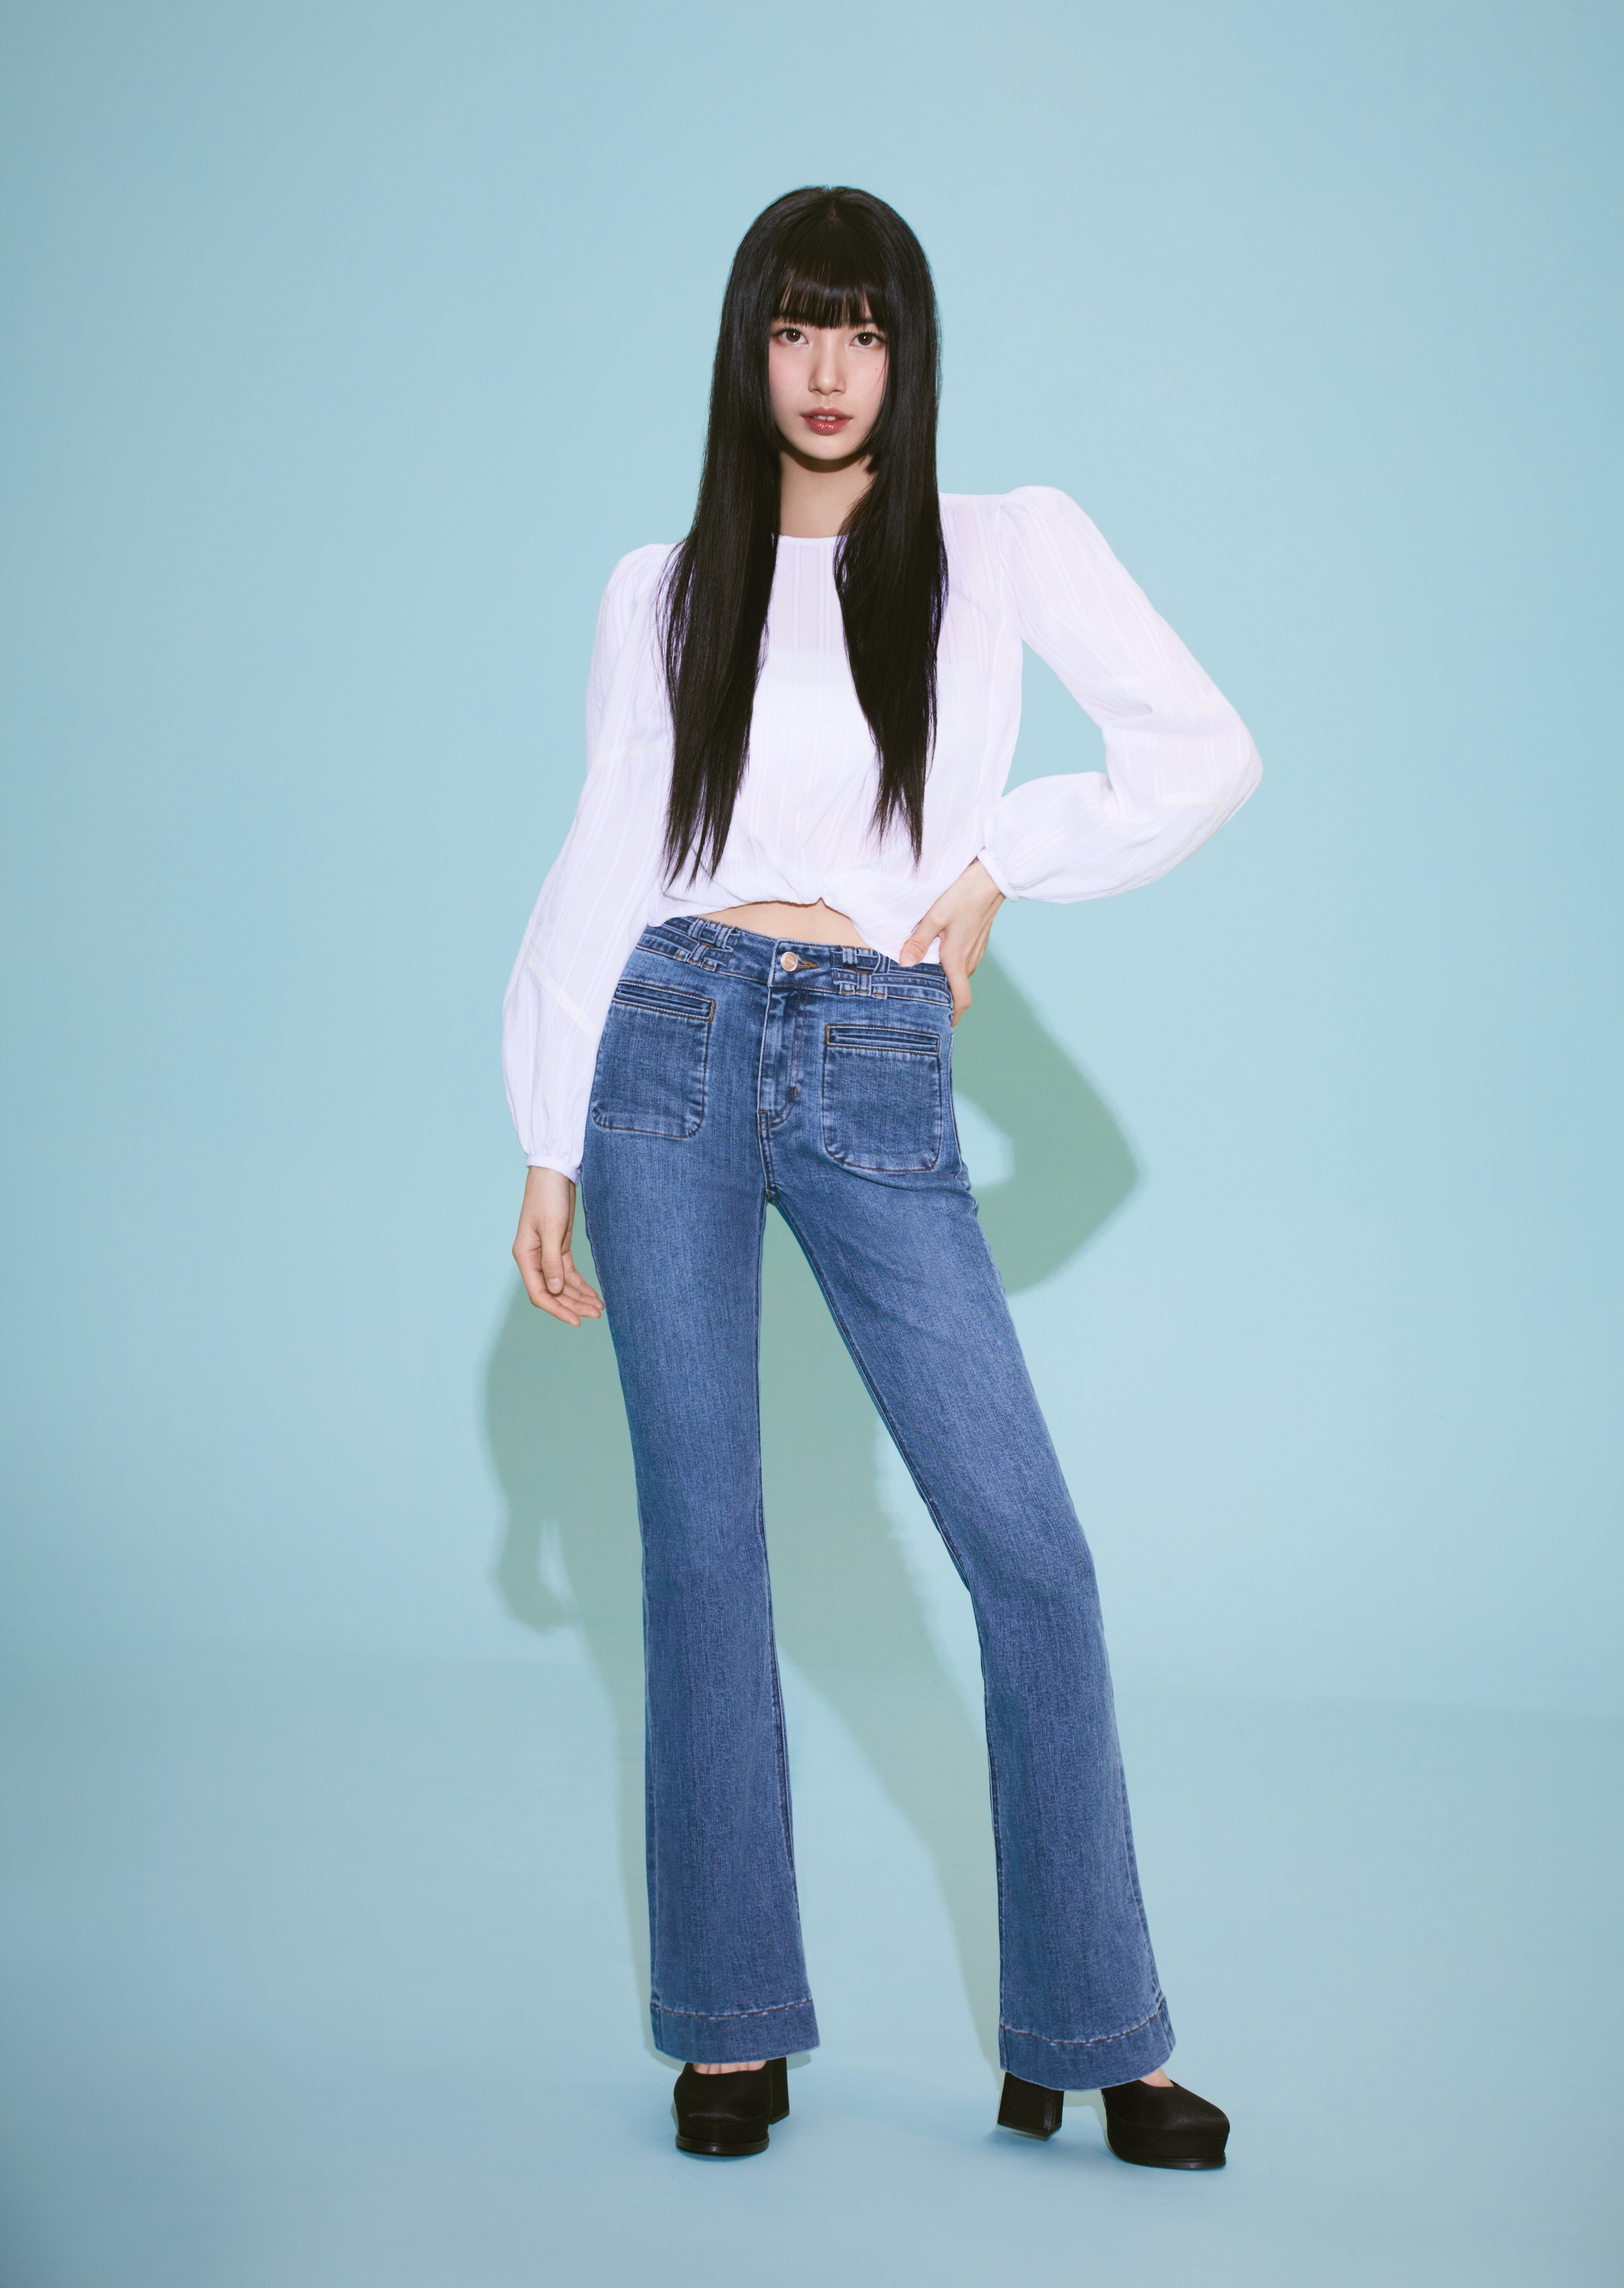 Bae Suzy for Guess 2023 SS Collection 'Swing Into Summer